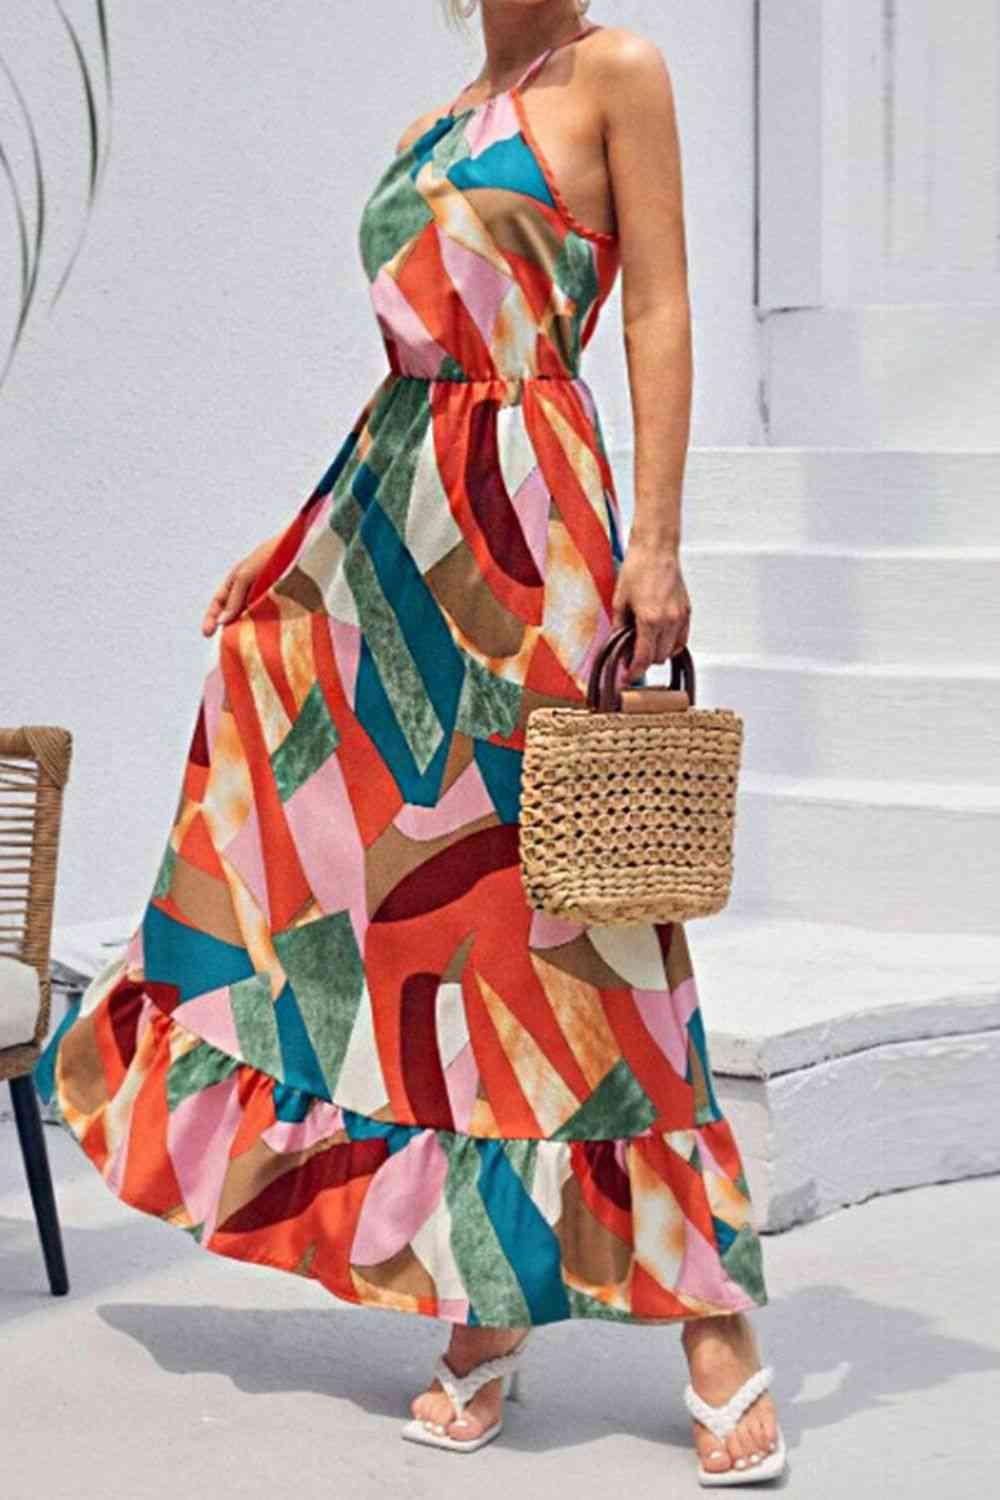 a woman in a colorful dress holding a basket